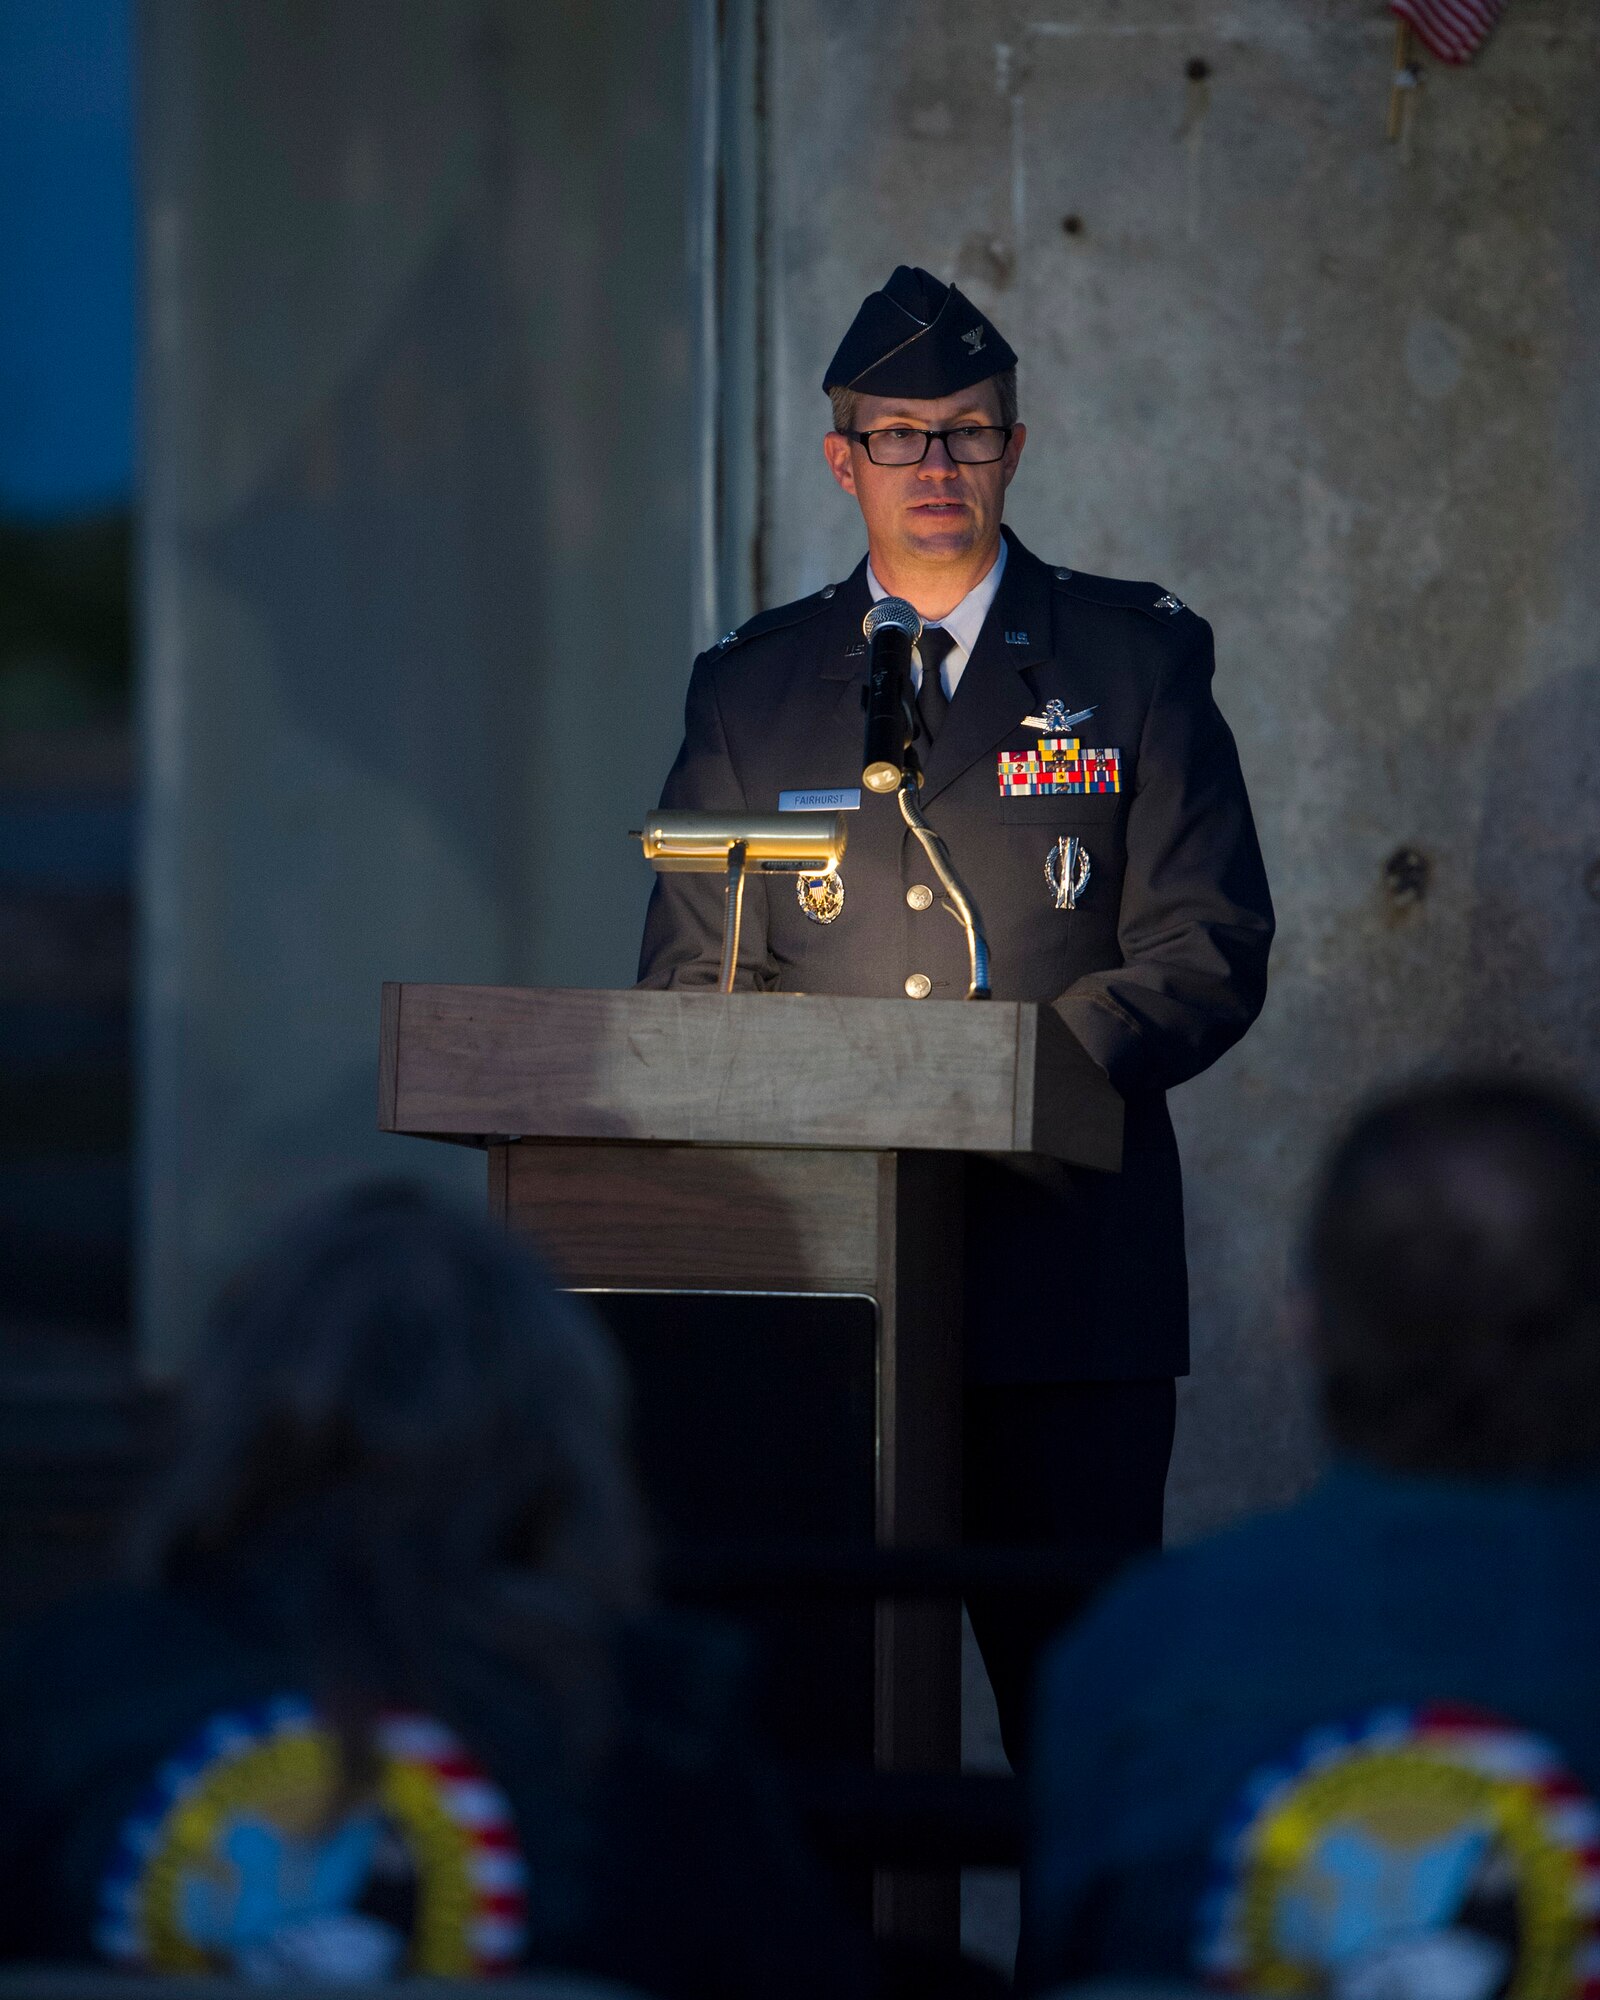 Col. Shawn Fairhurst, 45th Space Wing vice commander, addresses attendees of the 48th annual Apollo 1 Memorial Ceremony Jan. 27, 2015 at Launch Complex 34, Cape Canaveral Air Force Station, Fla. The ceremony honored the lives of the three crew members, Command Pilot Virgil "Gus" Grissom, Senior Pilot Edward H. White II and Pilot Roger B. Chaffee, who were killed by a flash fire during a launch pad test of their Saturn 1B rocket, Jan. 27, 1967. (U.S. Air Force photo/Matthew Jurgens)